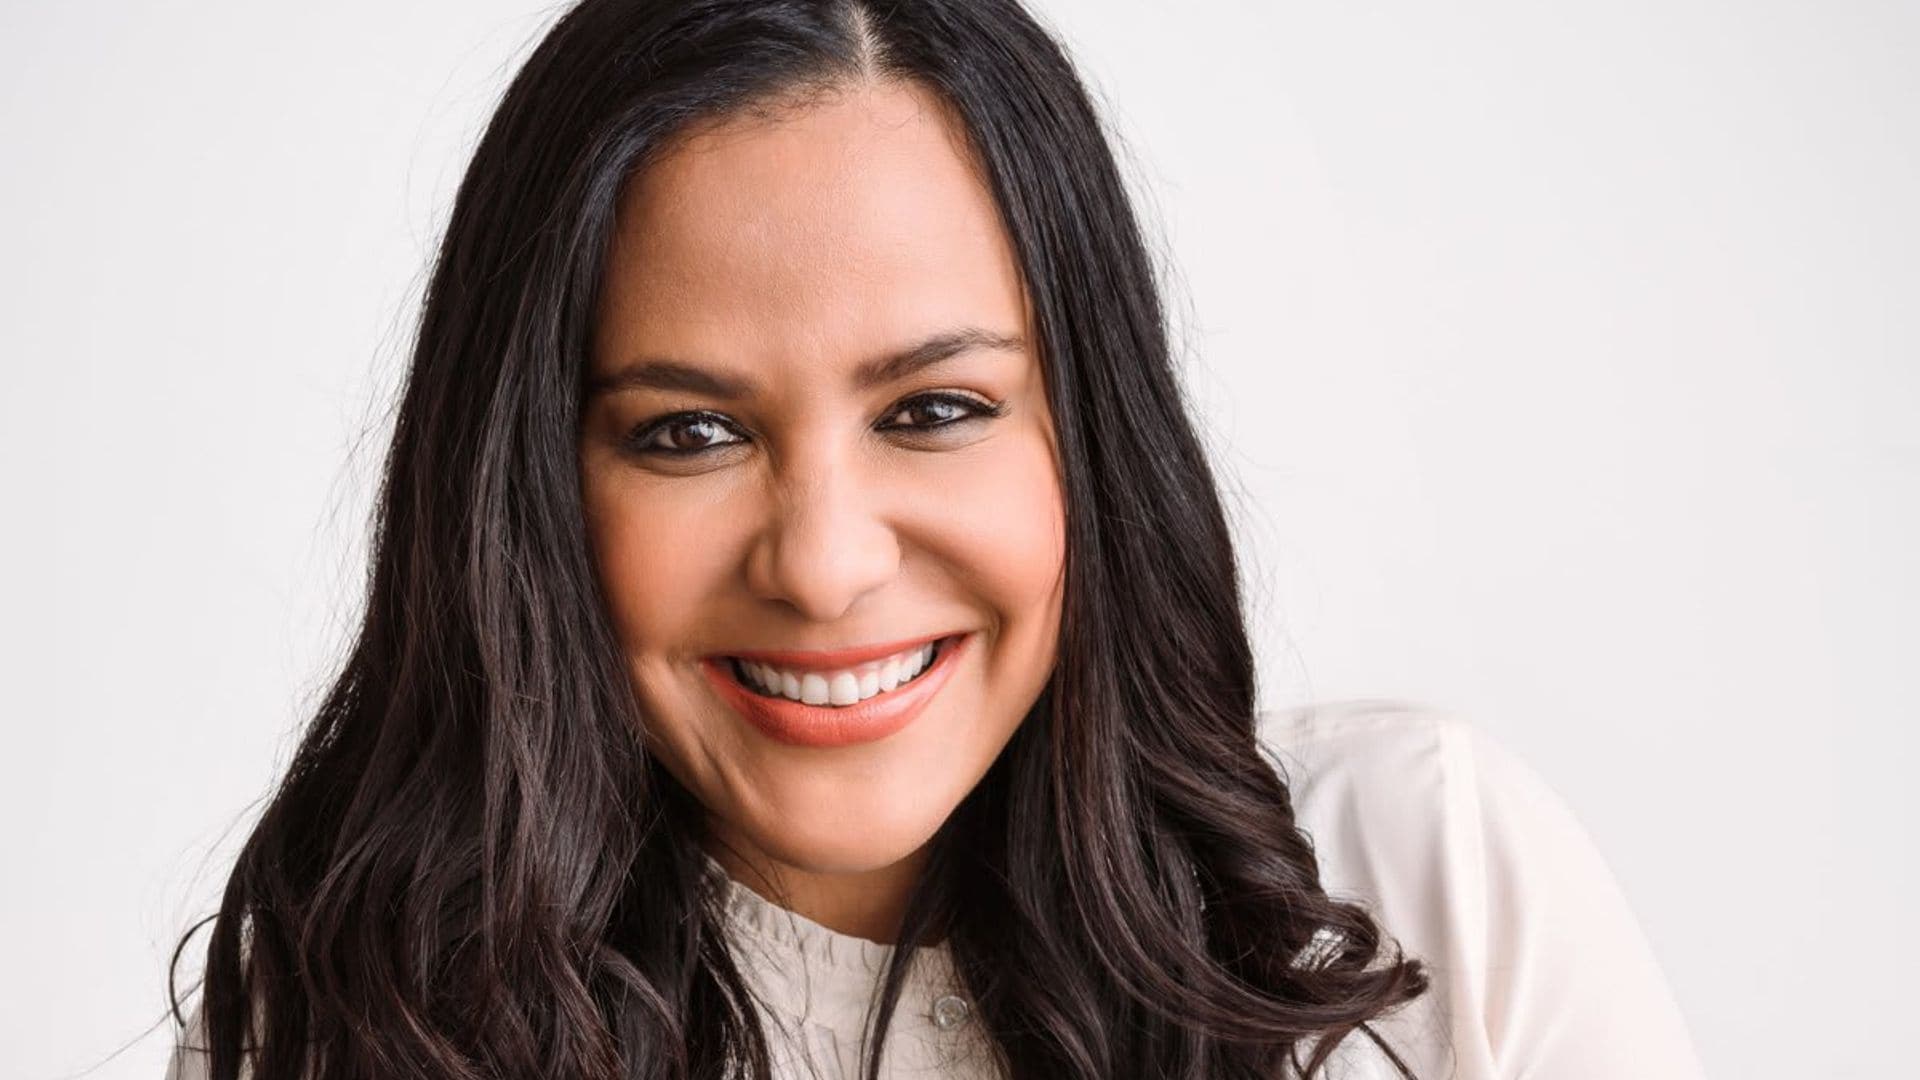 Meet Jane Santos: The Dominican who uses her voice to narrate Kamala Harris’s audiobook